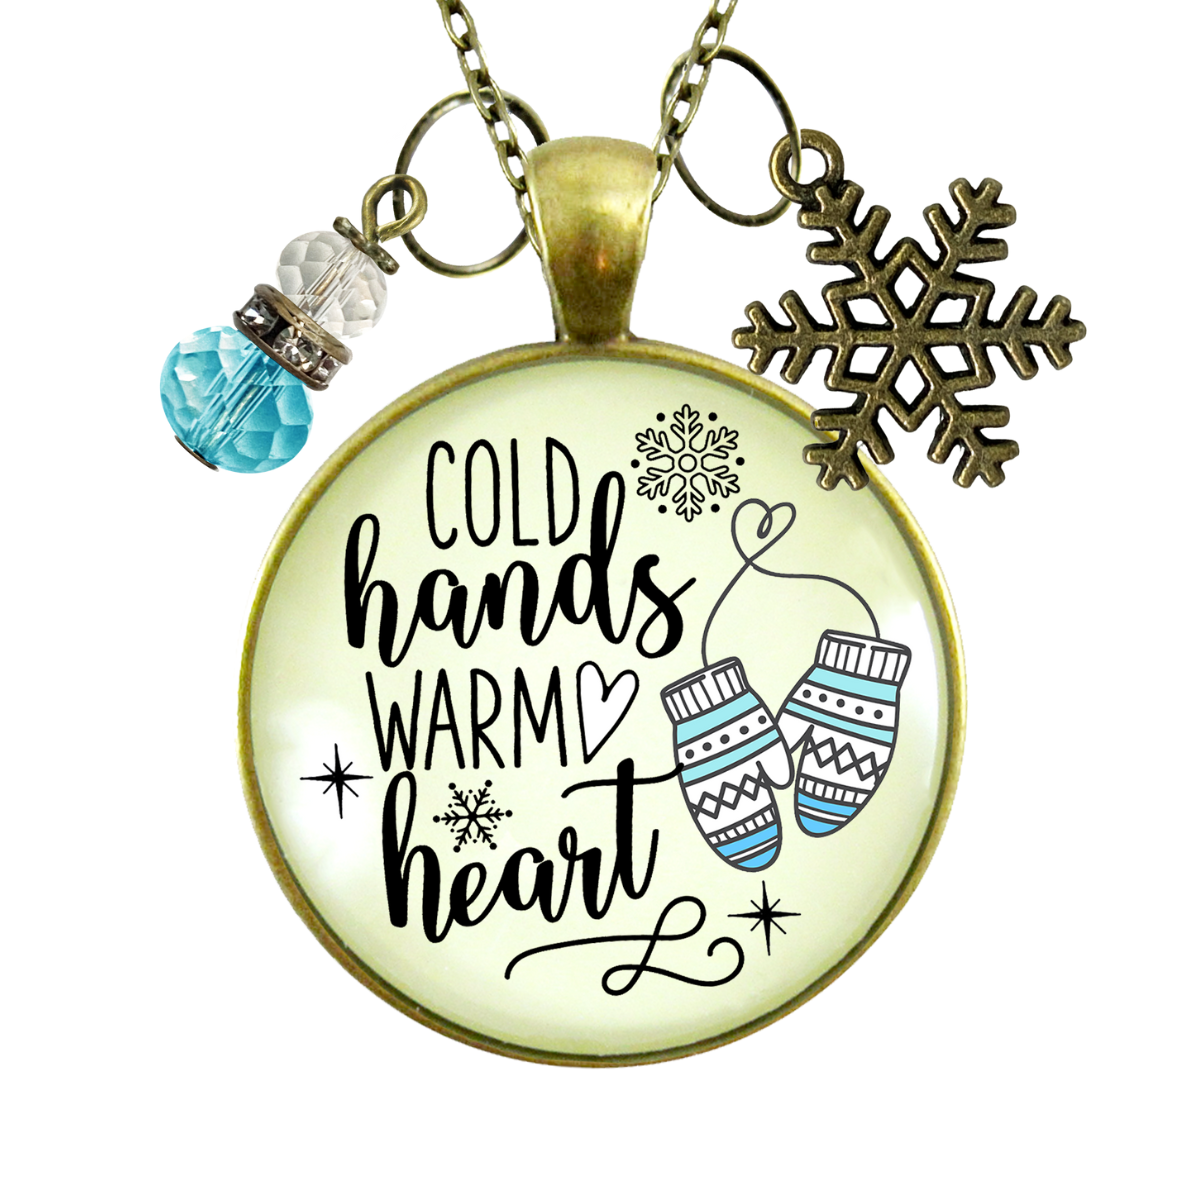 Cold Hands Warm Heart Winter Necklace Christmas Holiday Seasonal Jewelry Snowflake Charm Womens Gift  Necklace - Gutsy Goodness Handmade Jewelry